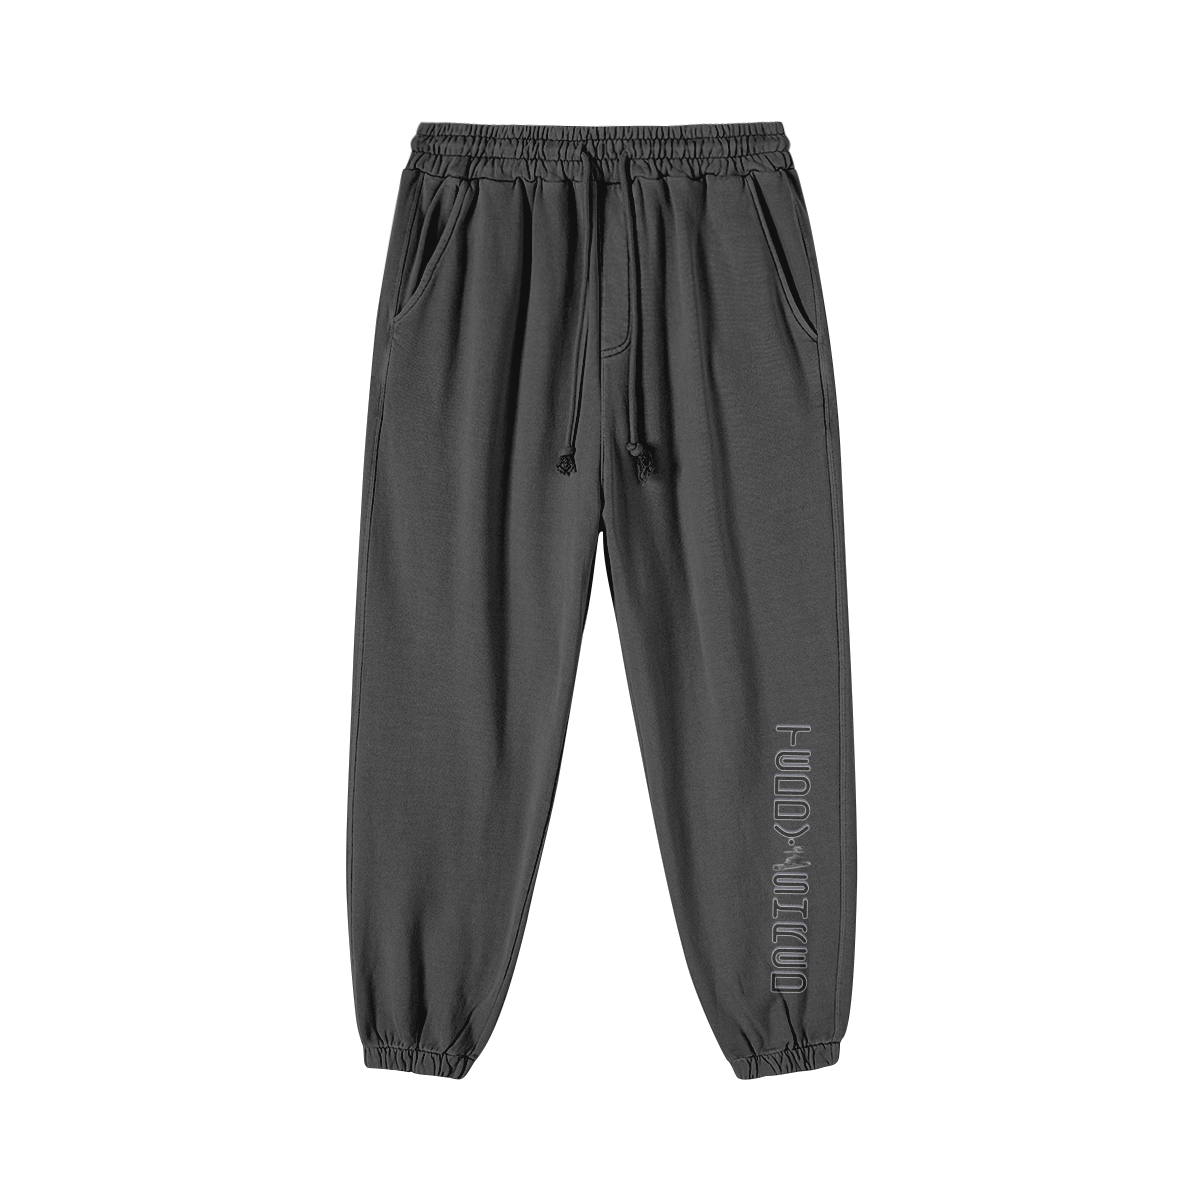 Eclipse Gray - Teddy Ride Shred 420GSM Unisex Super Heavyweight Washed Baggy Sweatpants - unisex sweatpants at TFC&H Co.